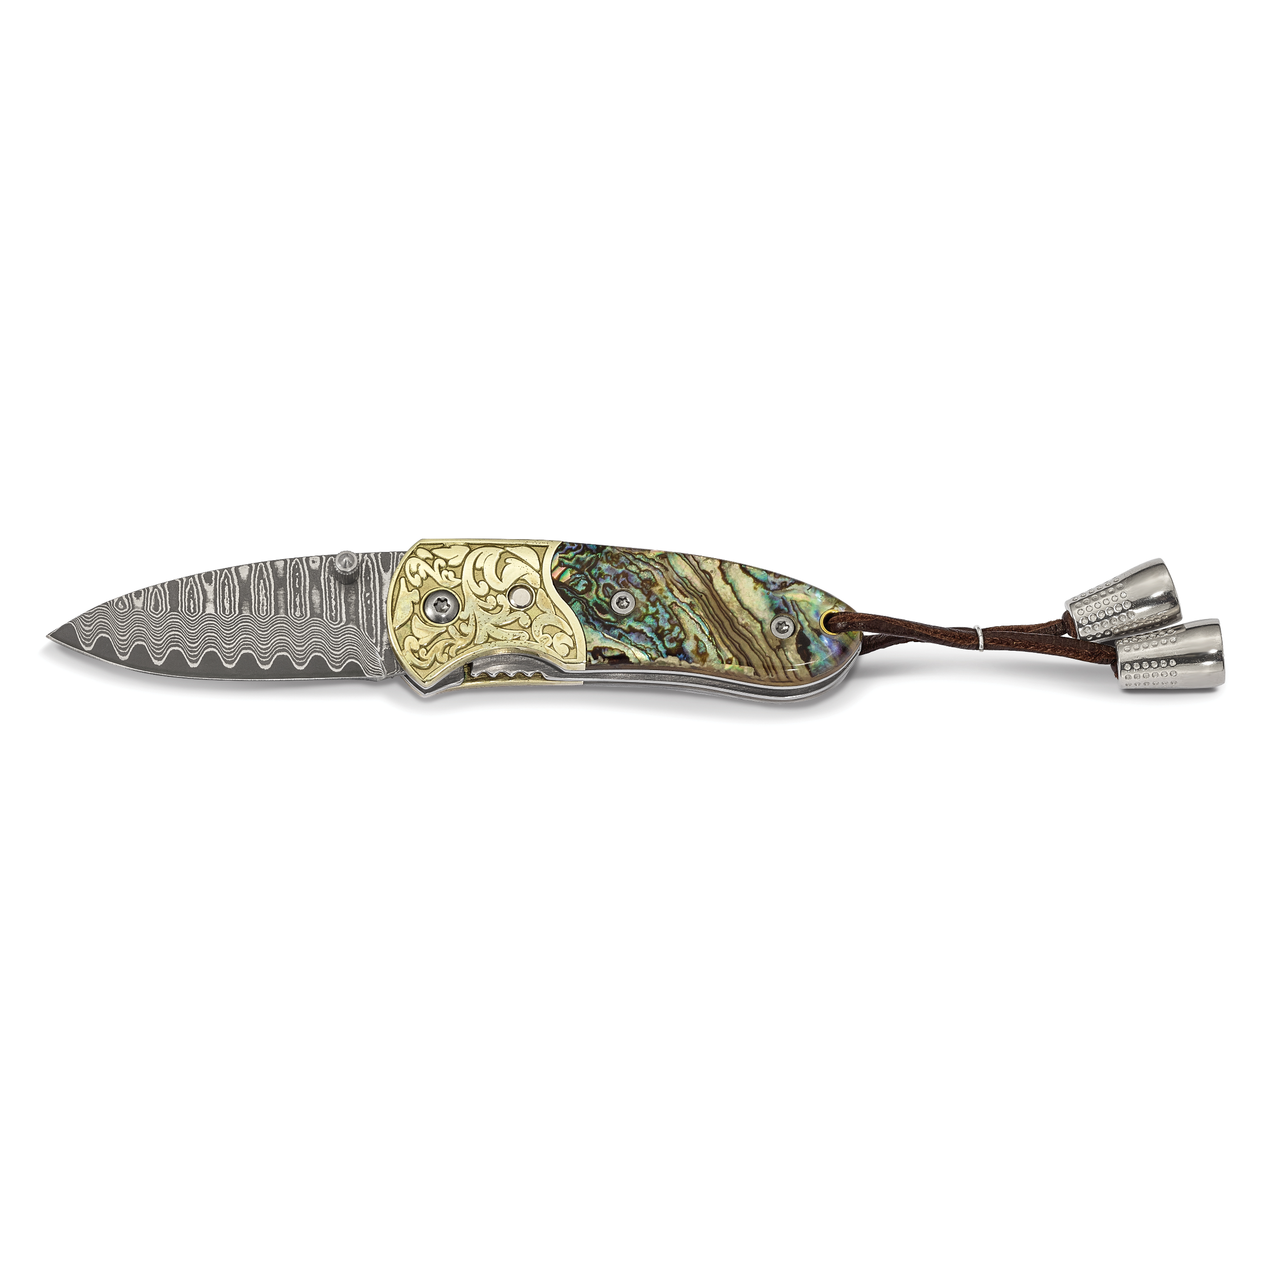 Genuine Abalone Shell Hand Knife Damascus Steel 256 Layer Folding Blade by Jere